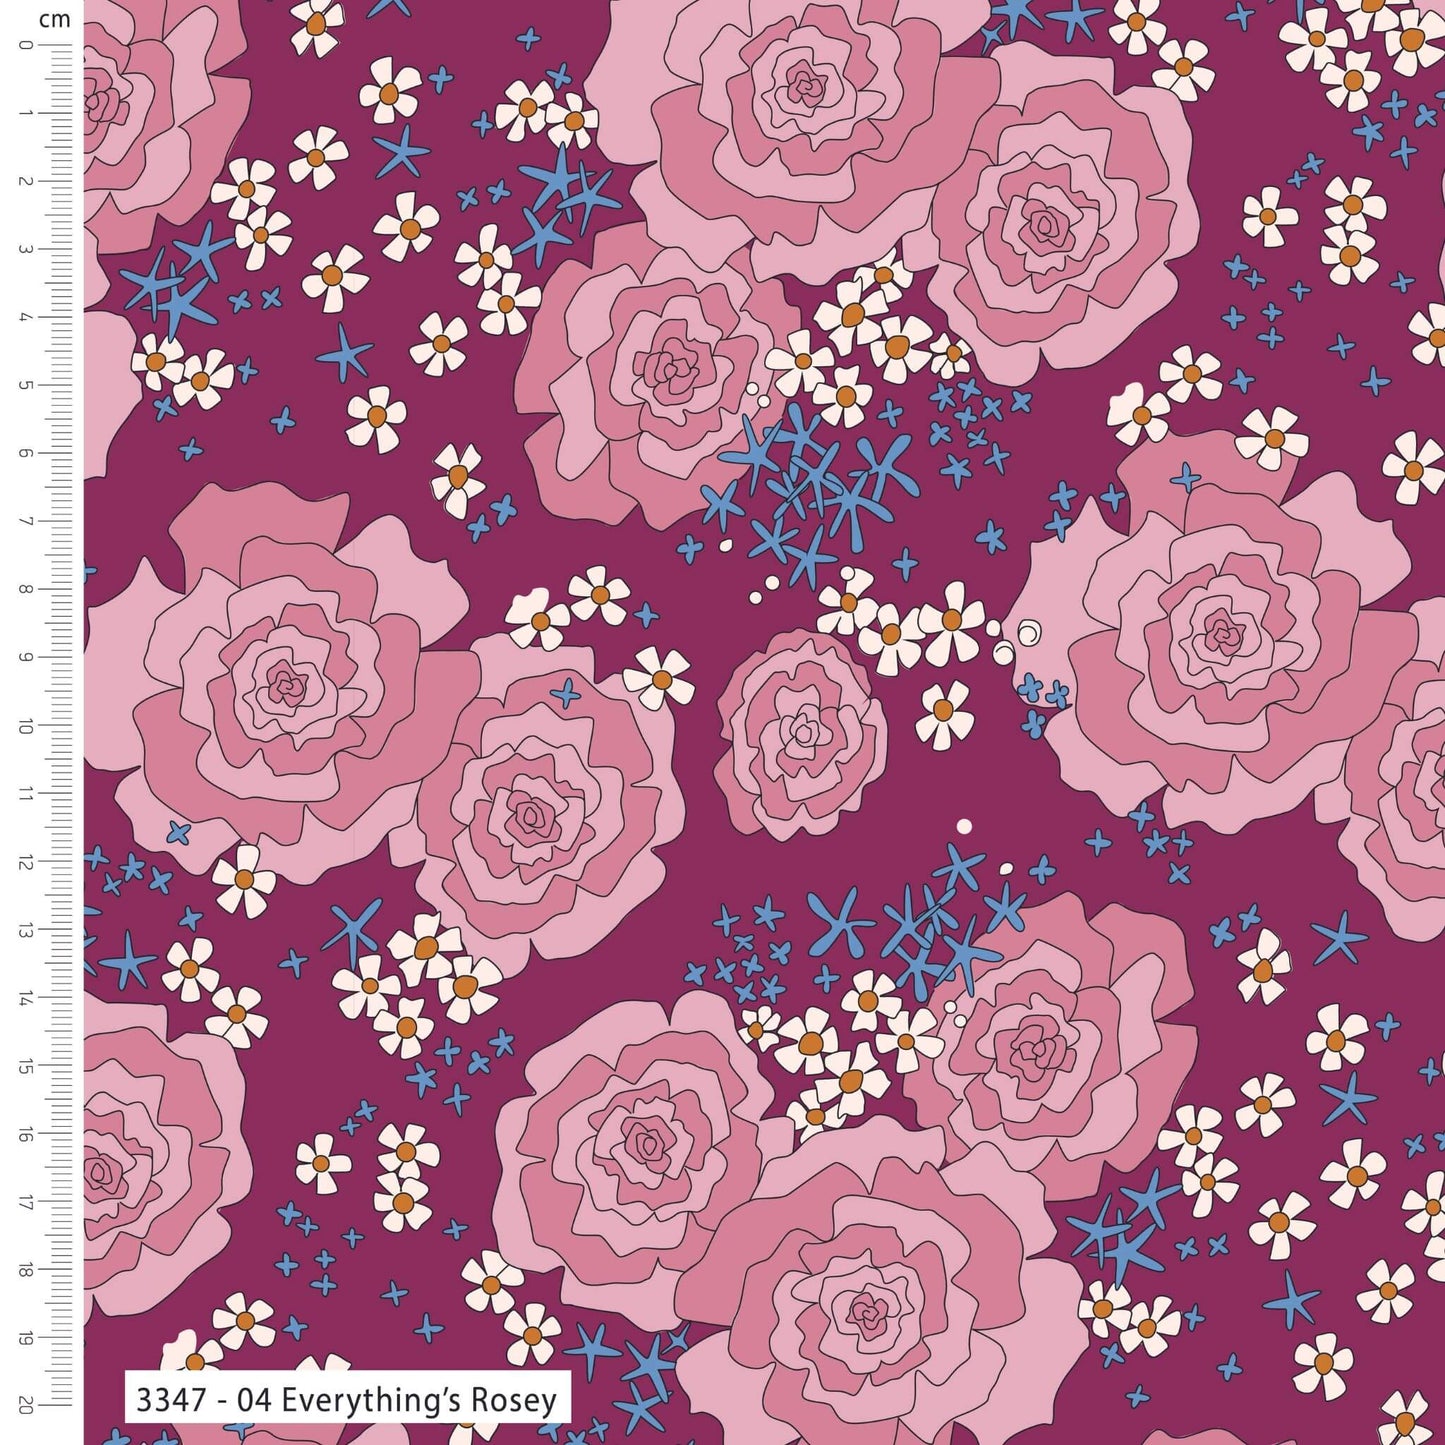 Everything's Rosey - Midnight Meadows Fabric Range - The Crafty Lass